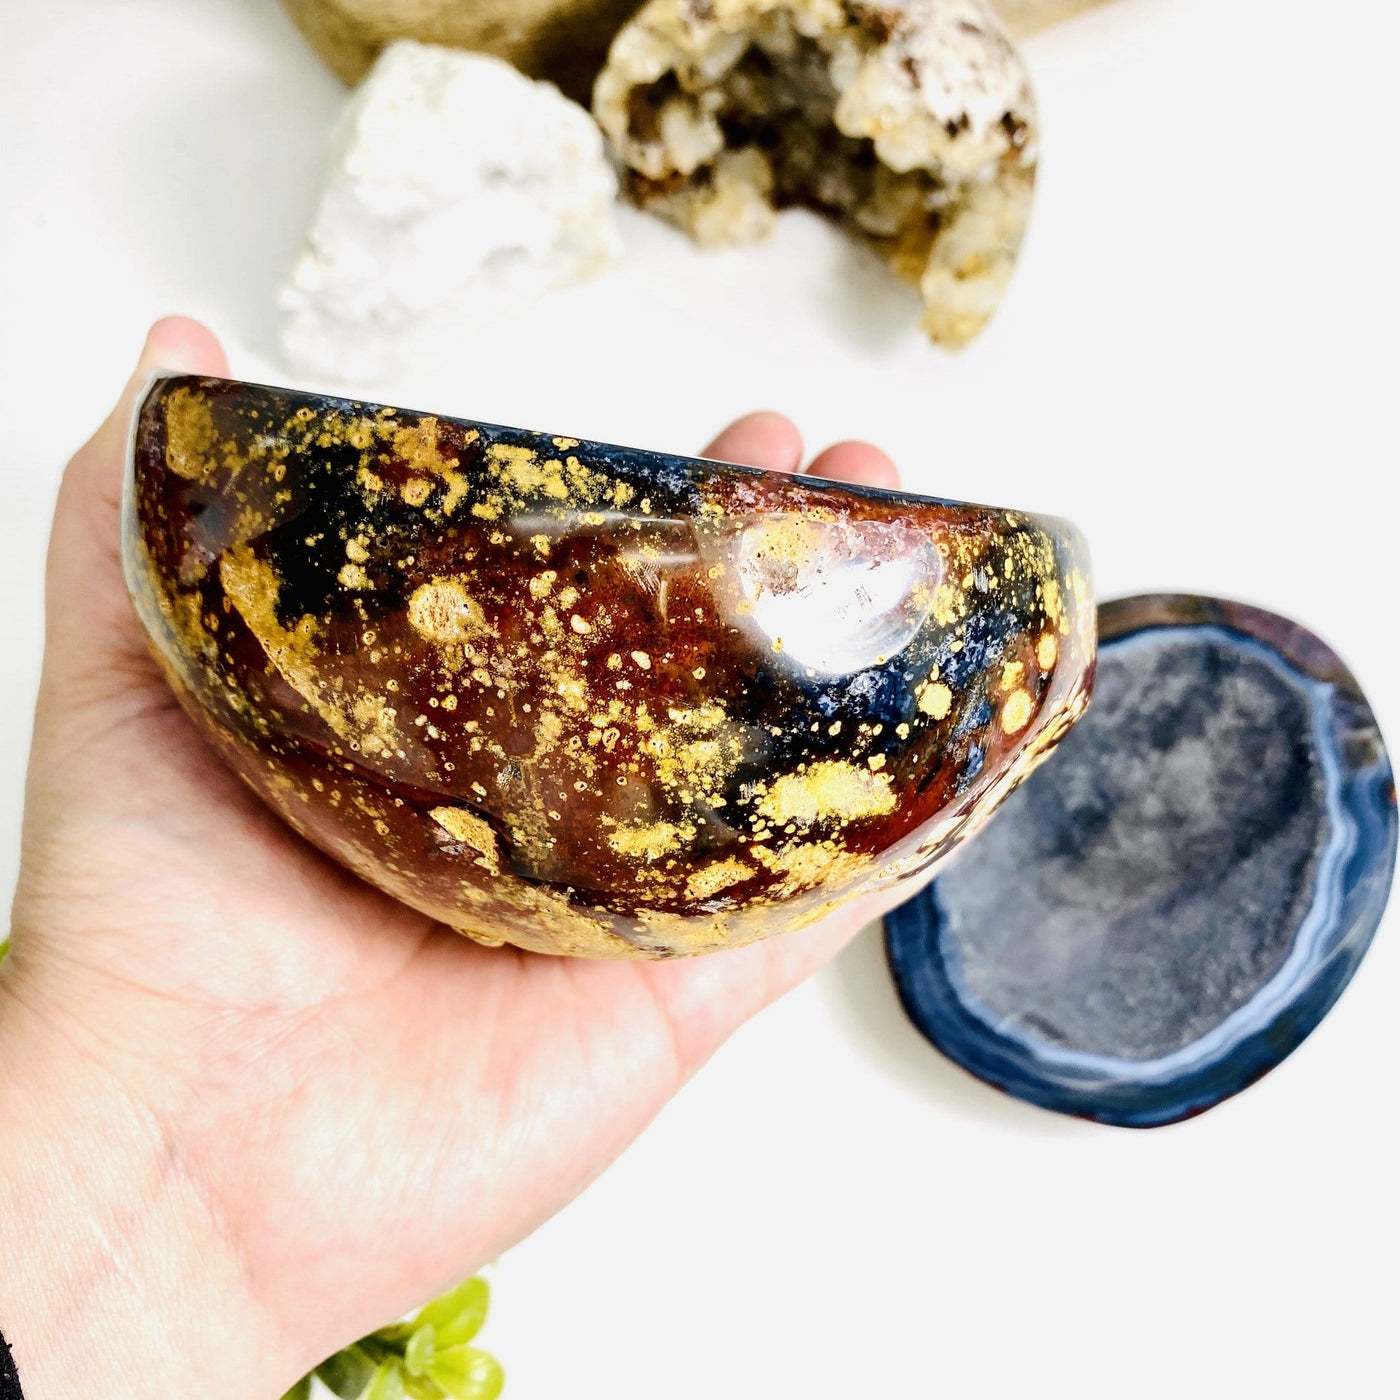 Agate Geode Polished Box held to show the yellow, red, and black colors of the side.